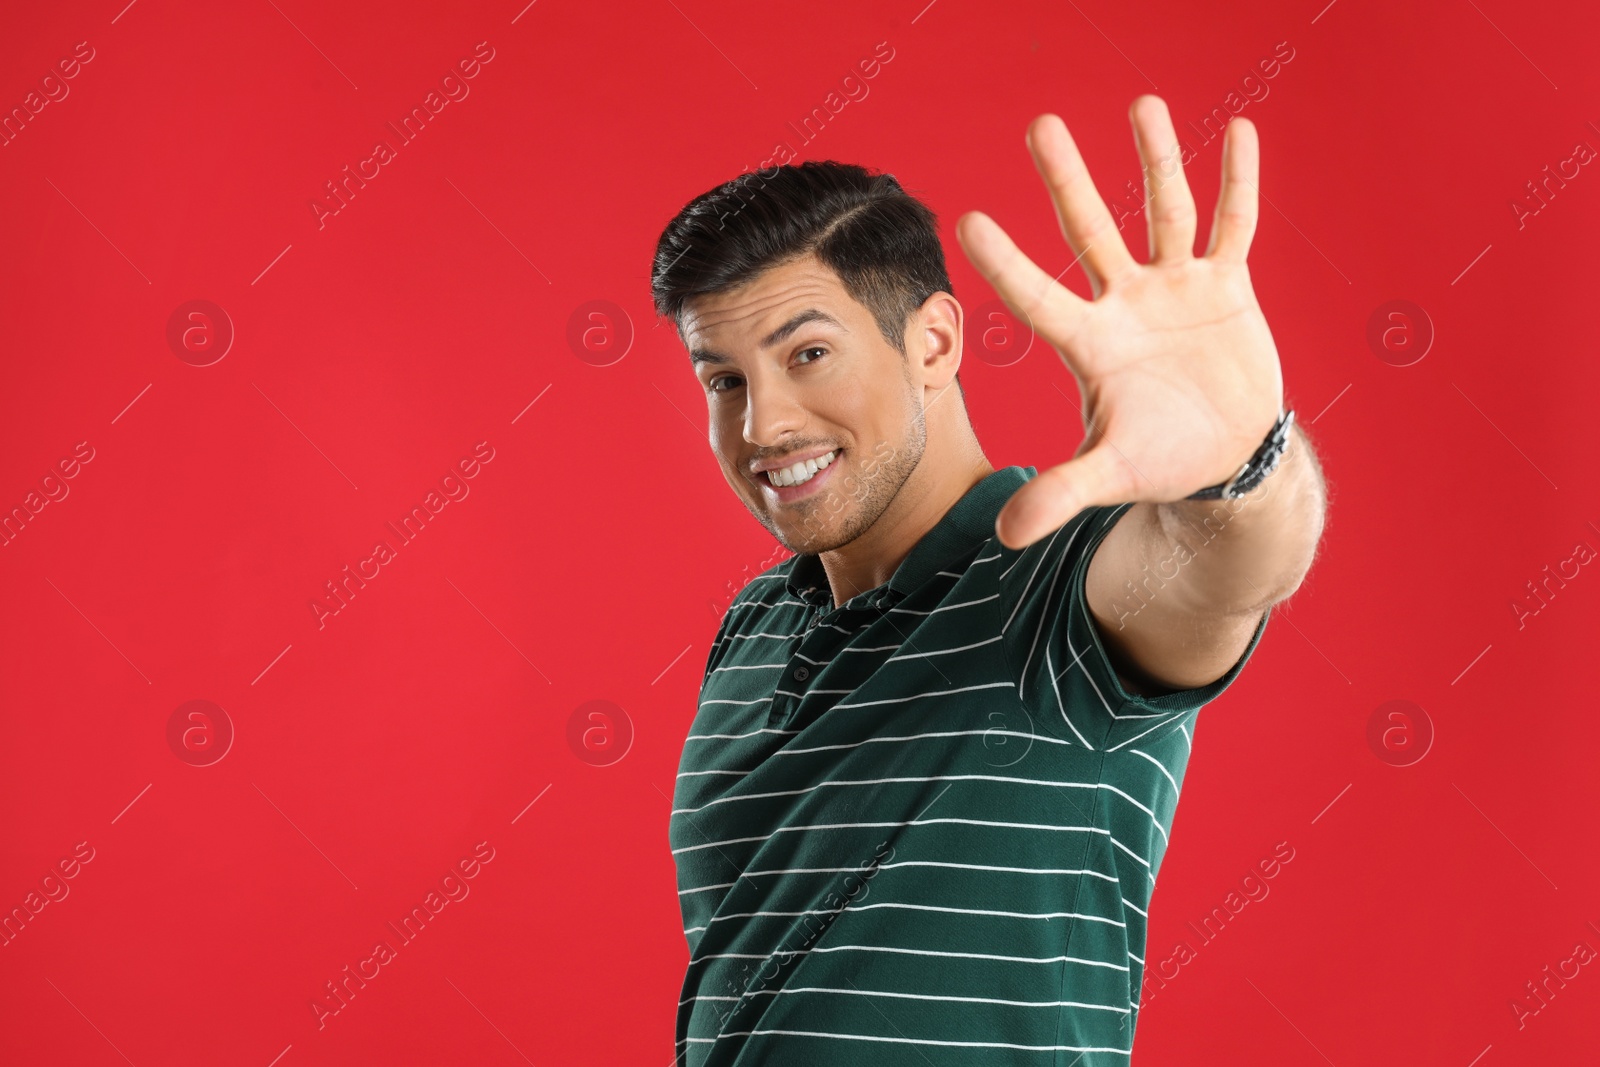 Photo of Man showing number five with his hand on red background